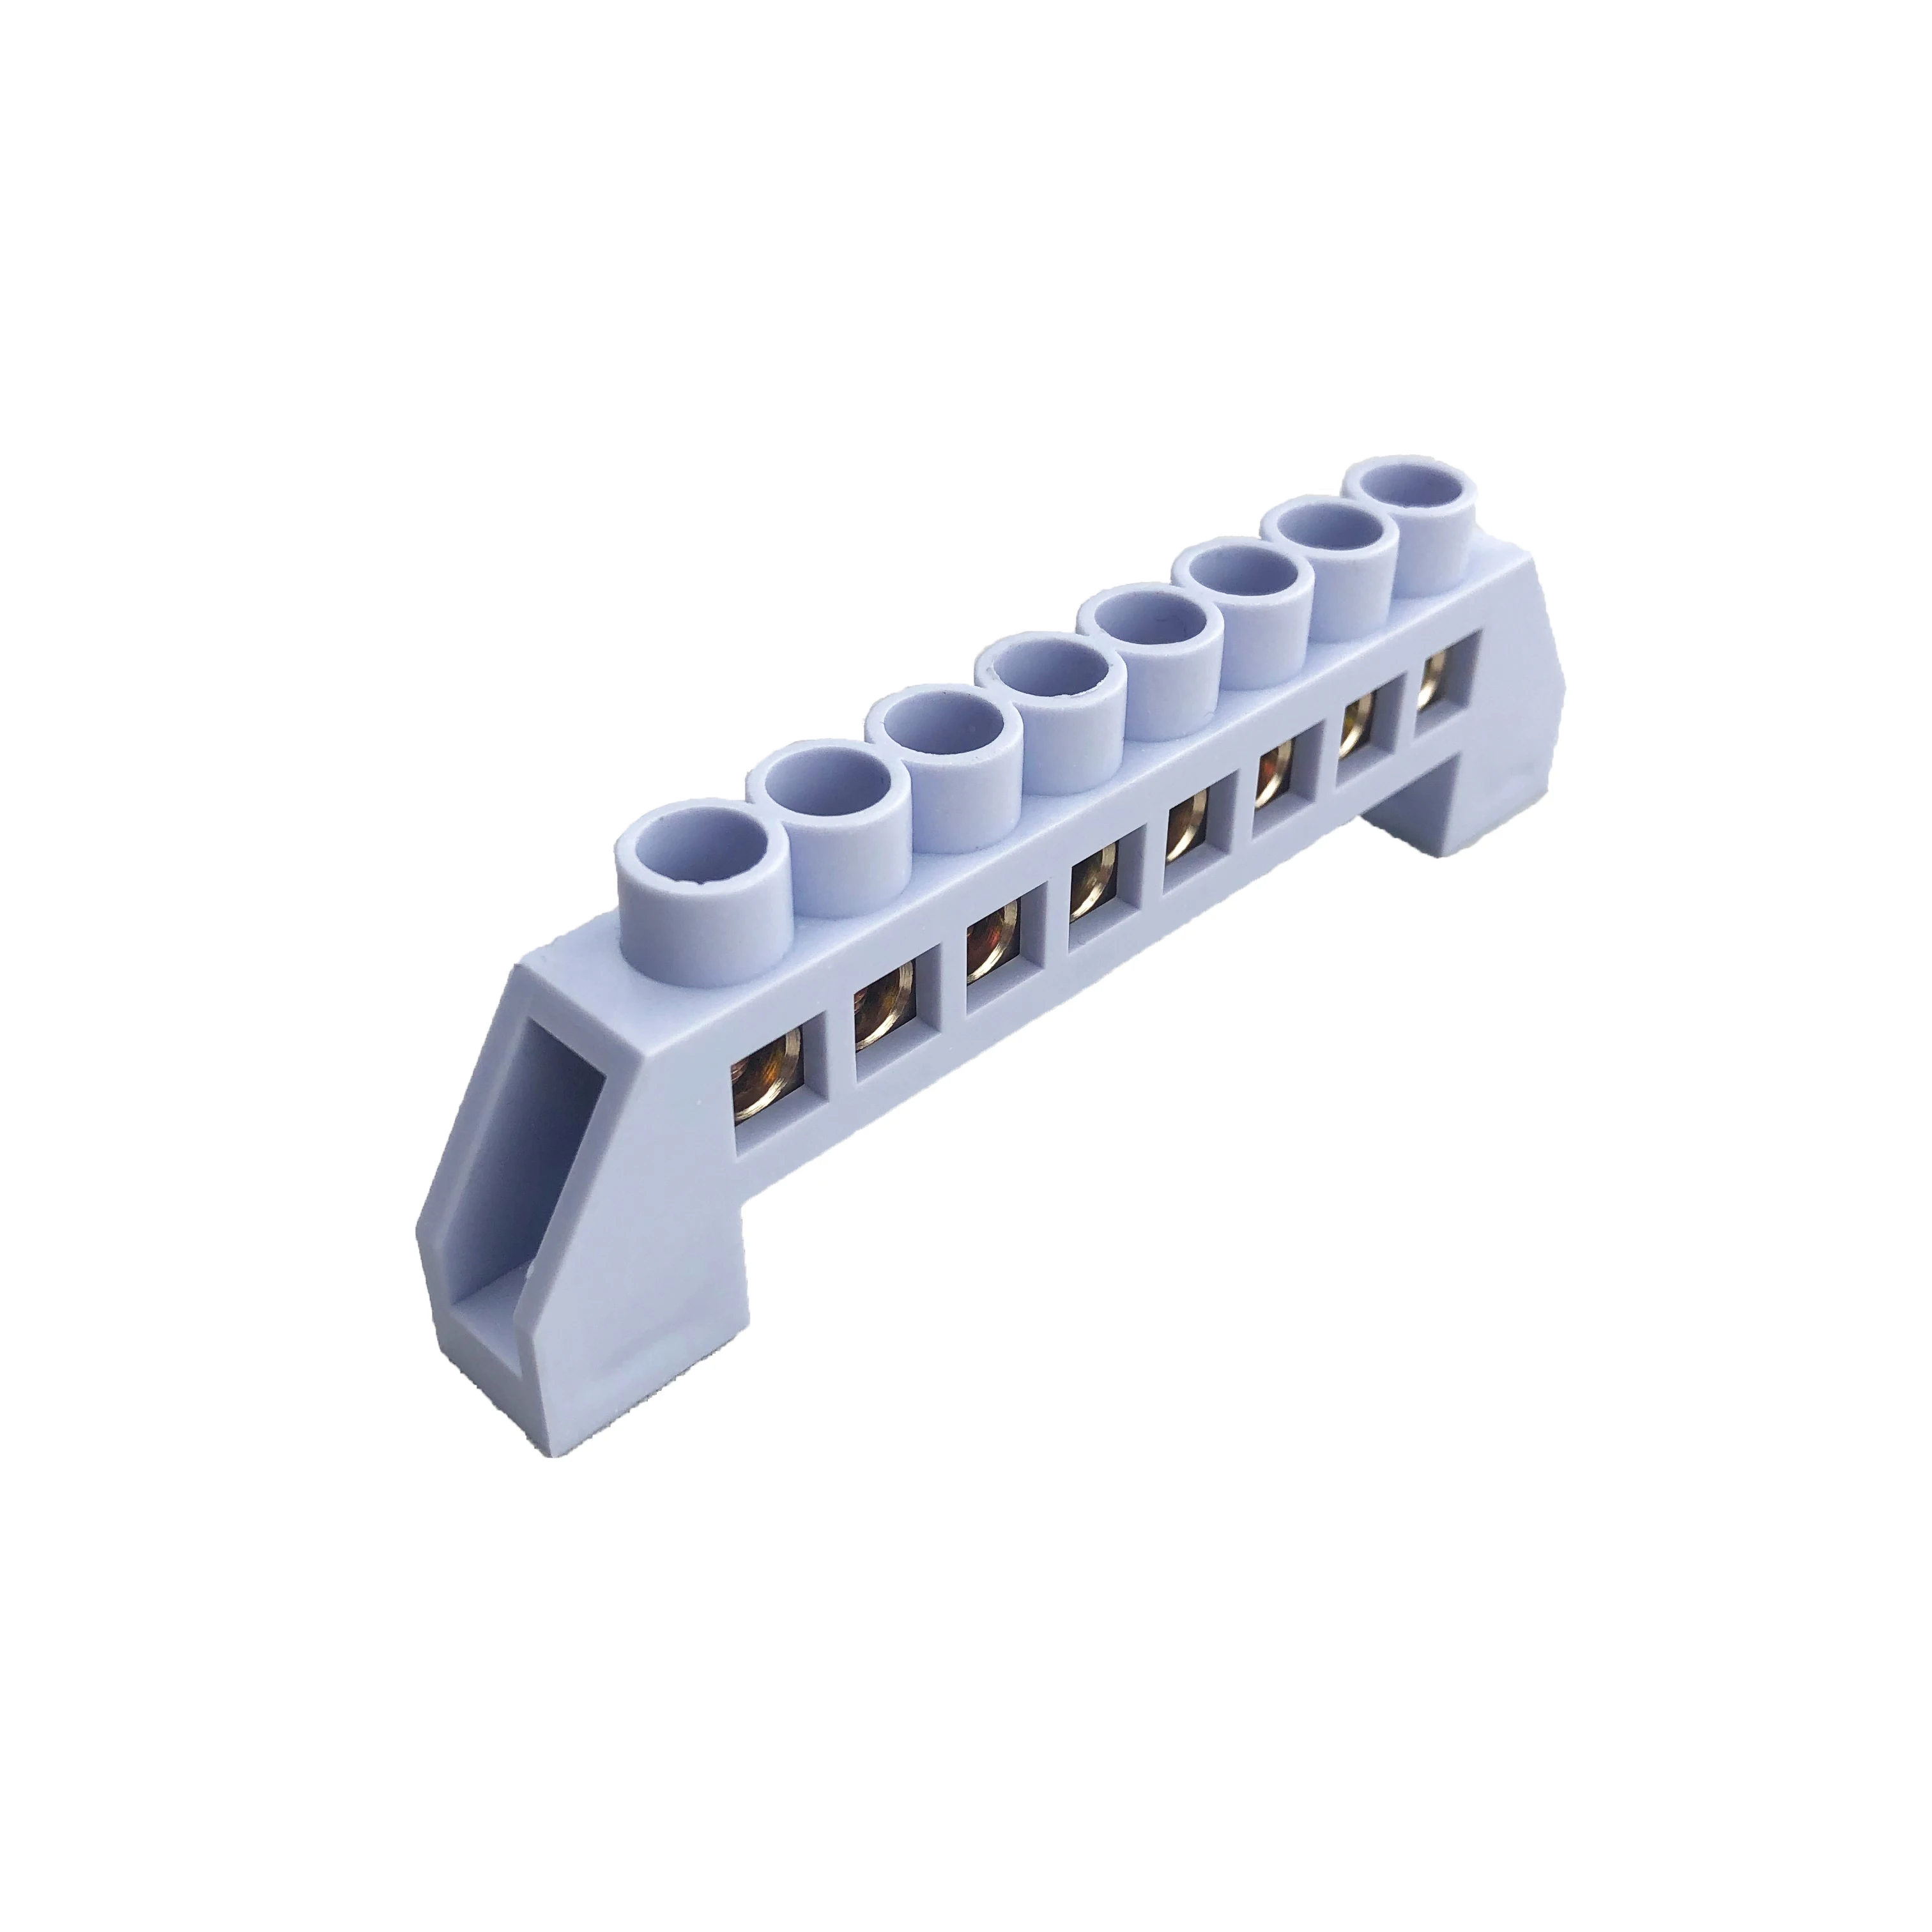 Factory Price Purple White All Plastic Copper Neutral Screw Bar Terminal Blocks For Junction Cabinets (1600455080322)